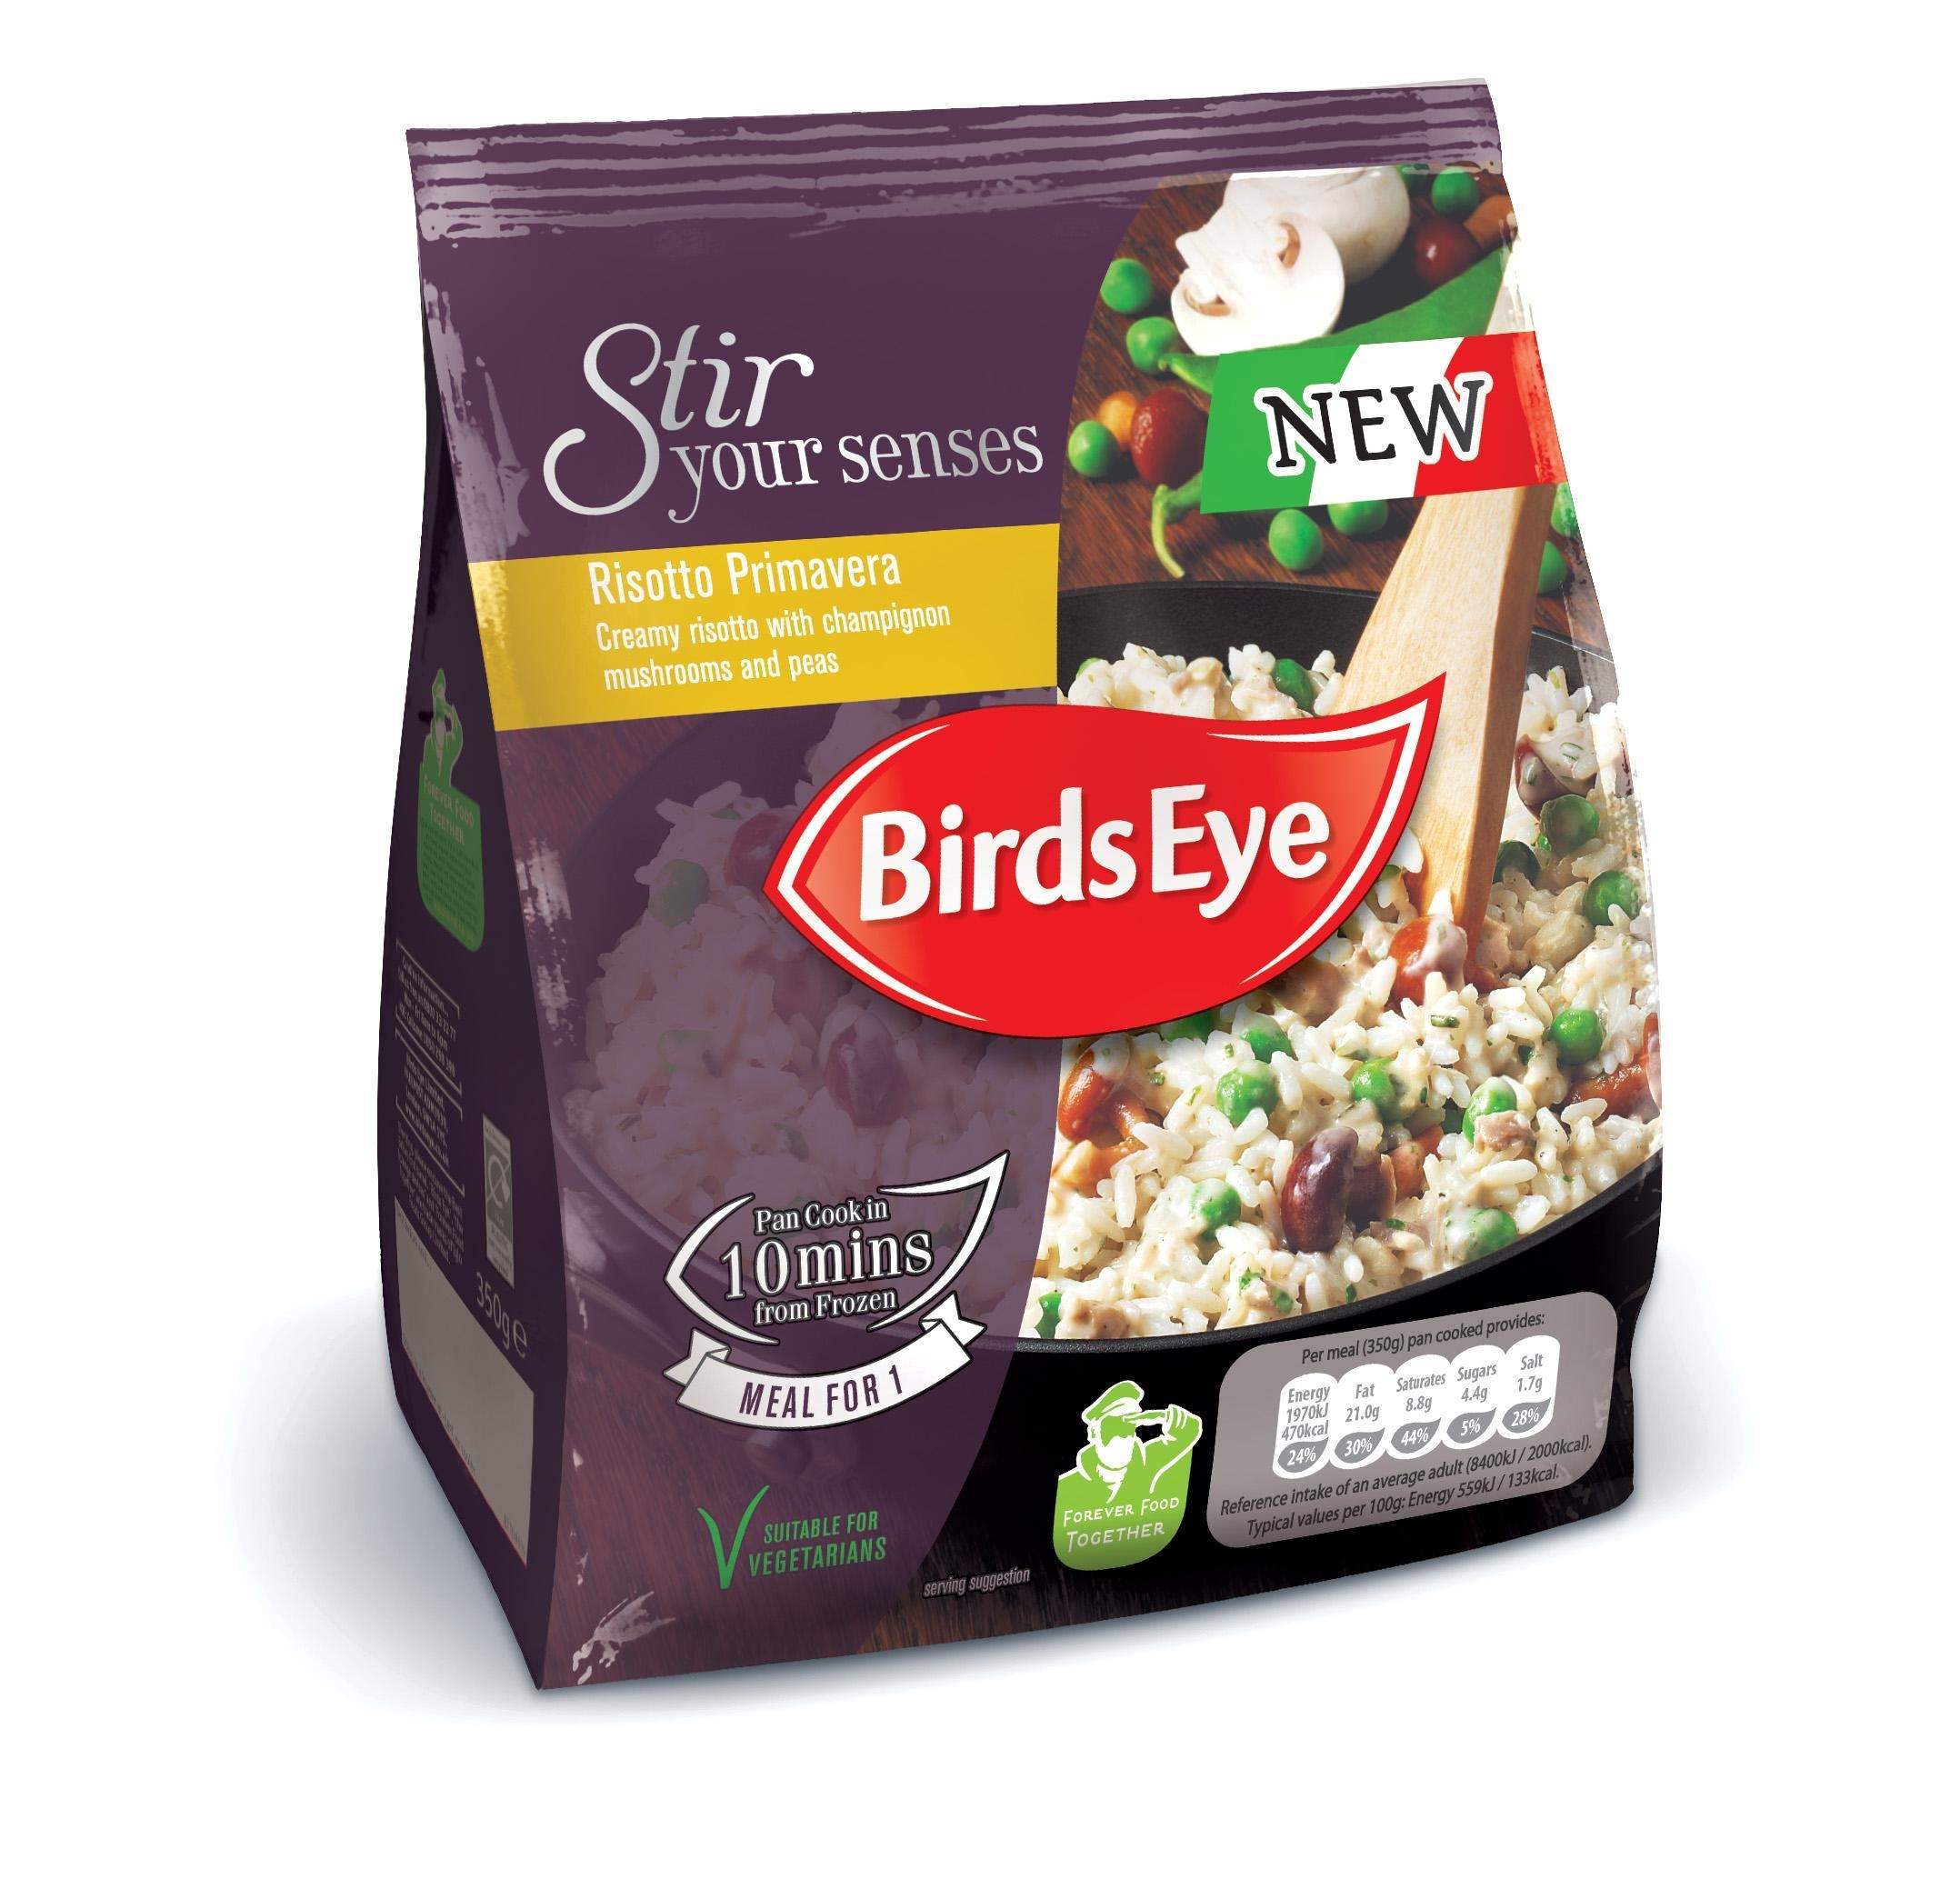 Birds Eye expands repertoire with new product launches